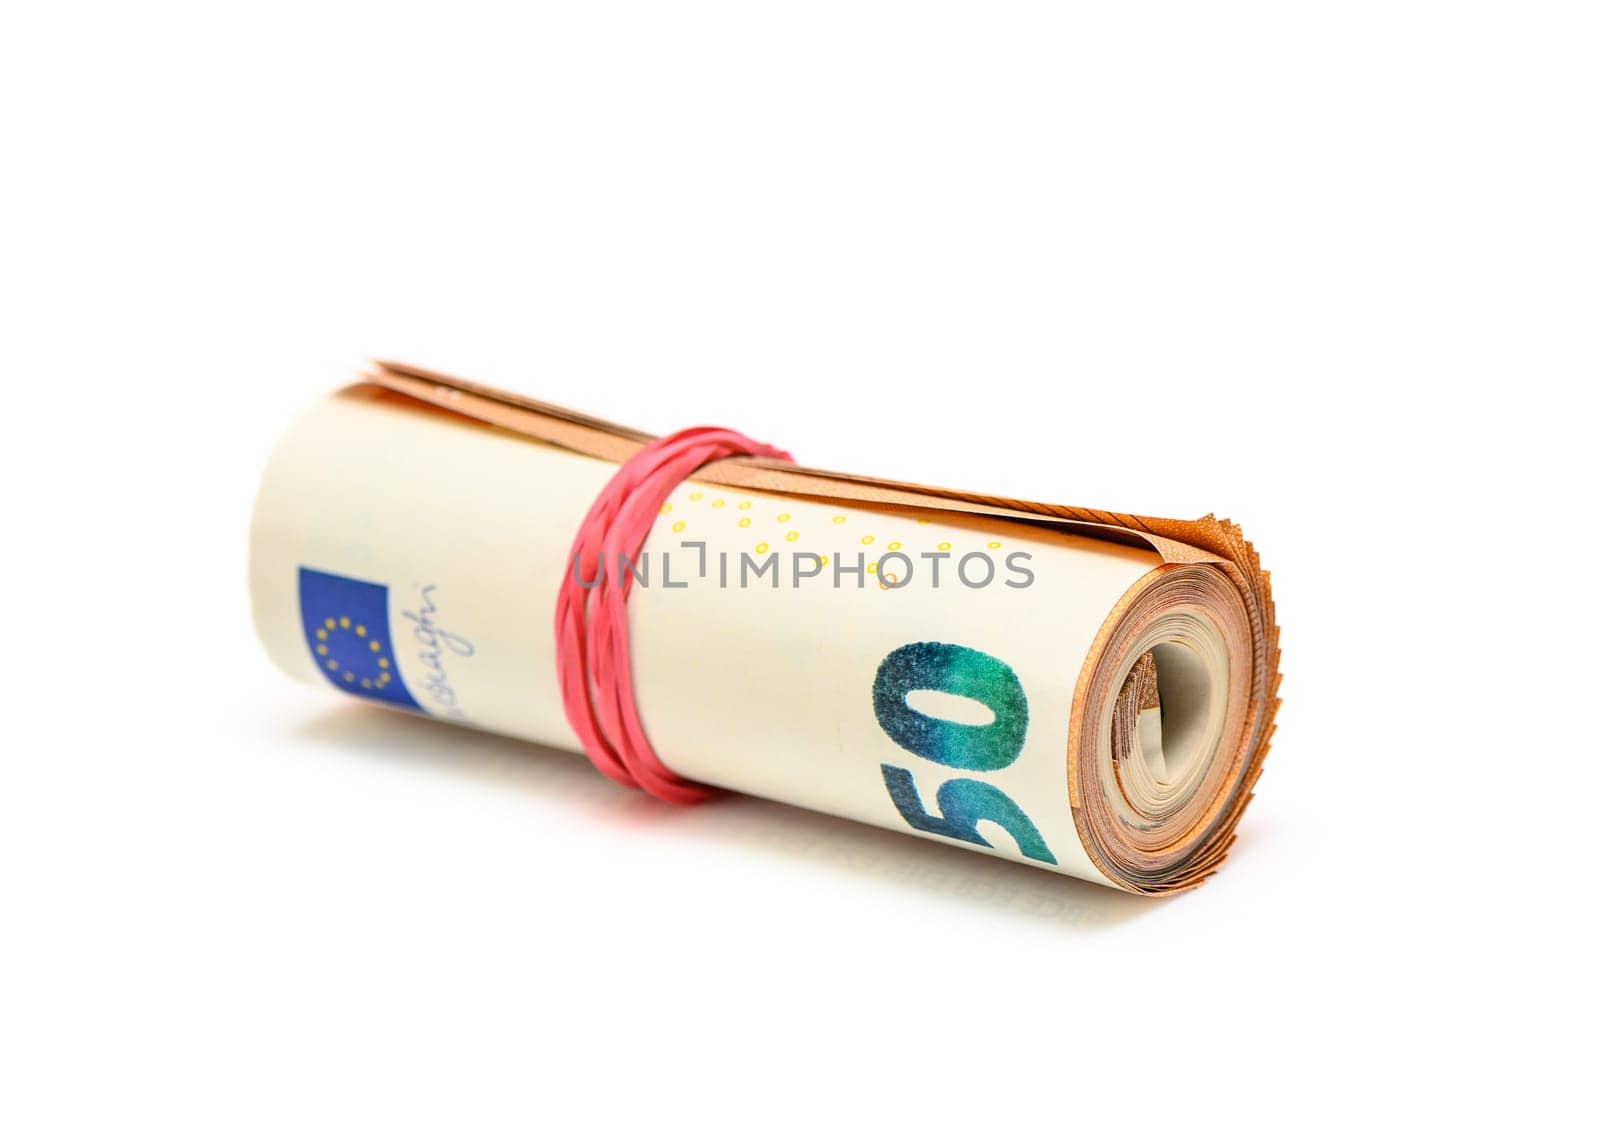 50 euro bills on white background rolled into a tube 19 by Mixa74